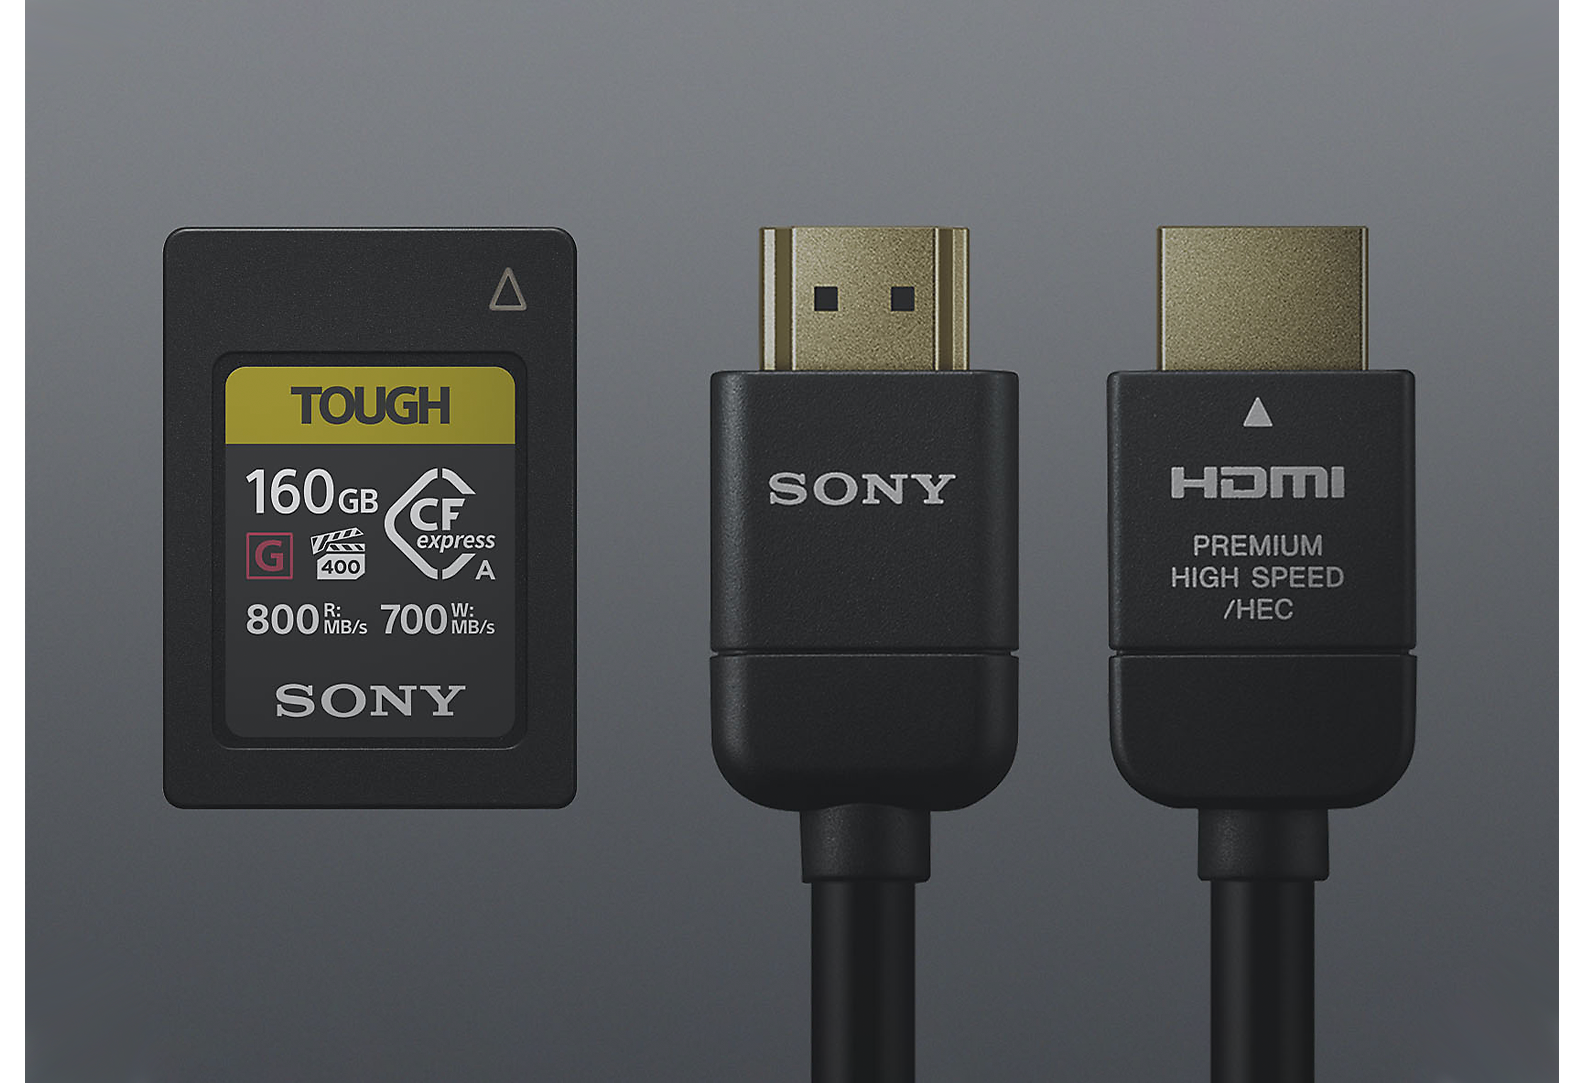 A Sony Tough SD card and two black Sony cables on a grey background